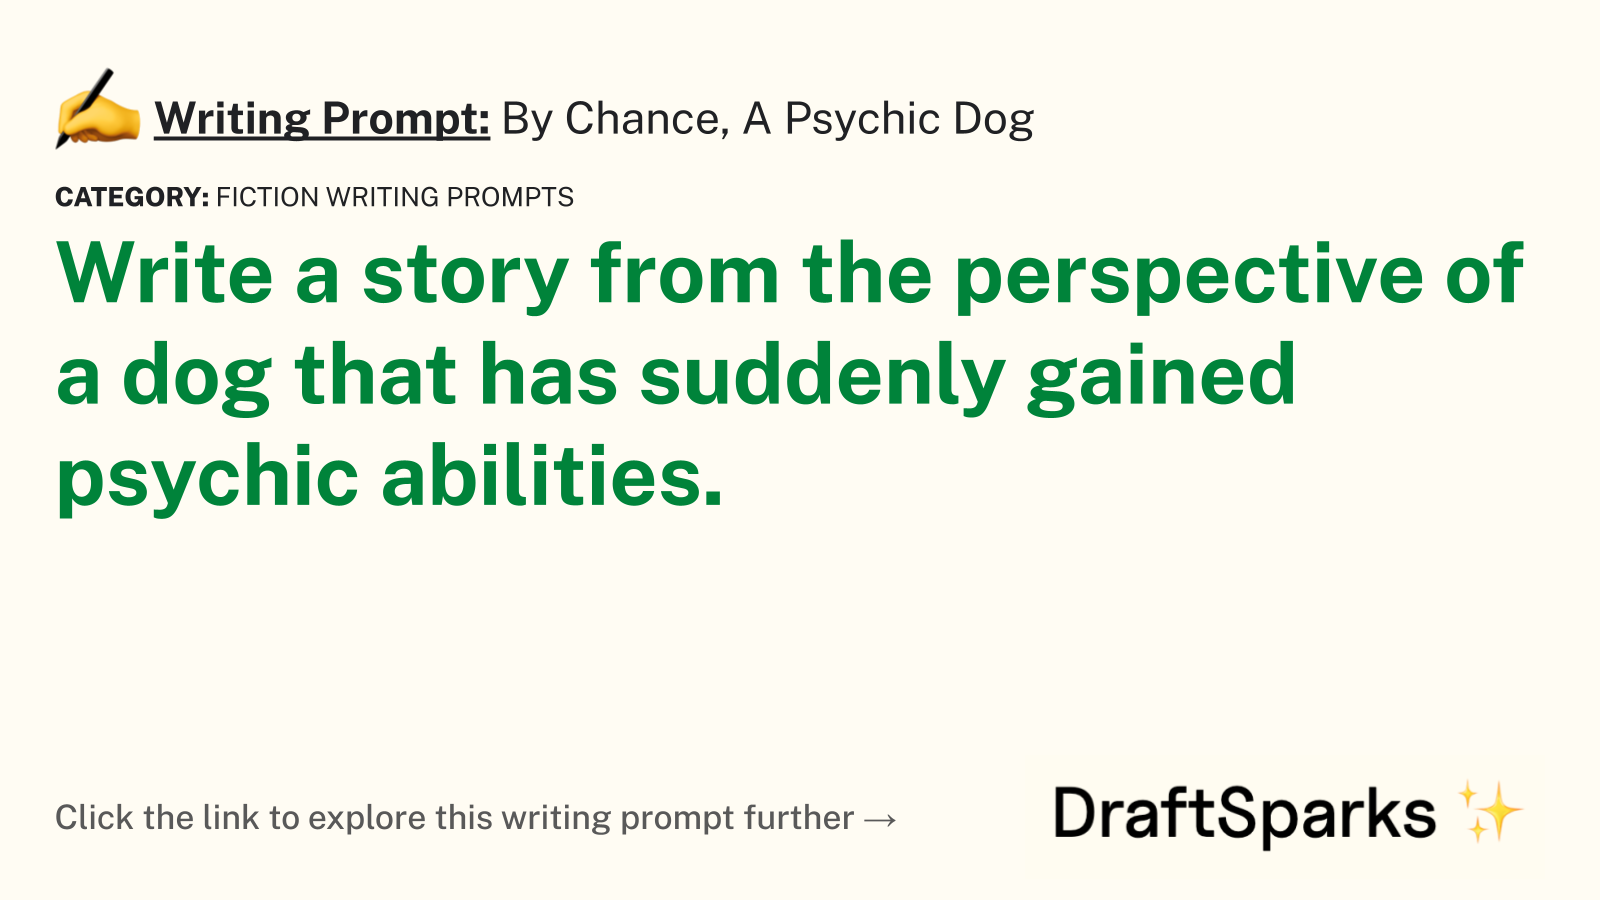 By Chance, A Psychic Dog